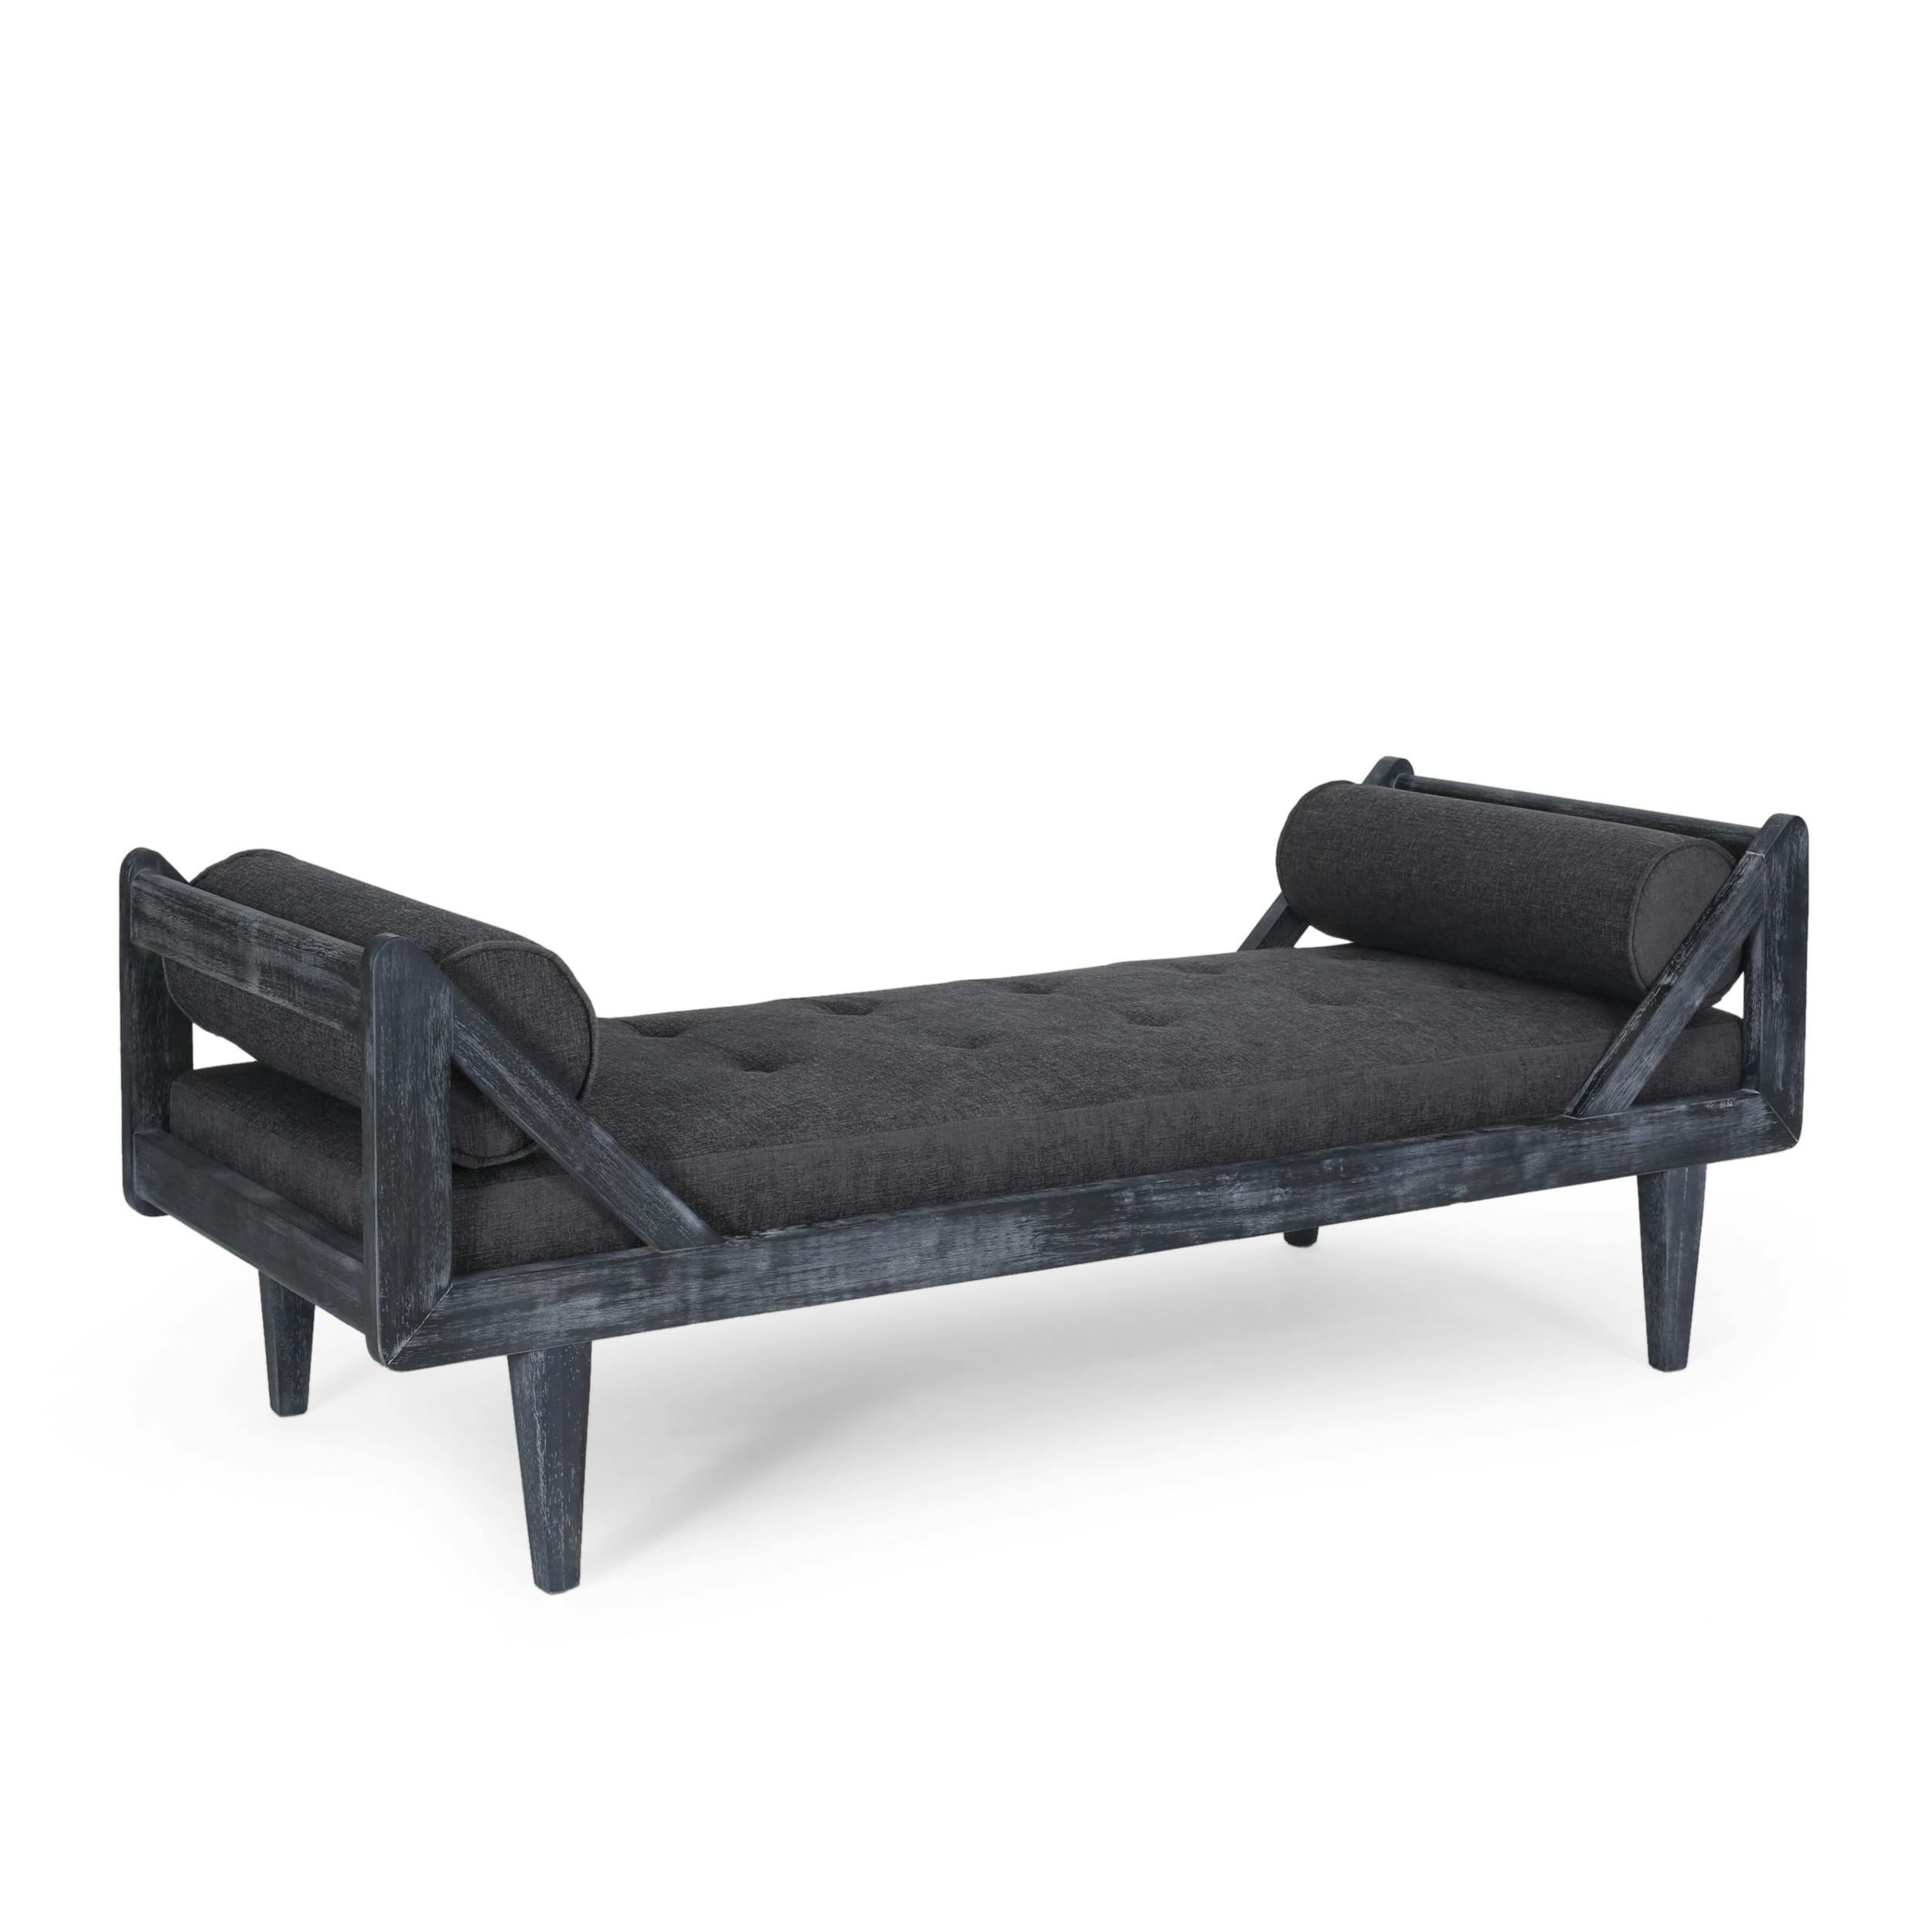 Rustic Gray Faux Leather Tufted Chaise Lounge with Weathered Wood